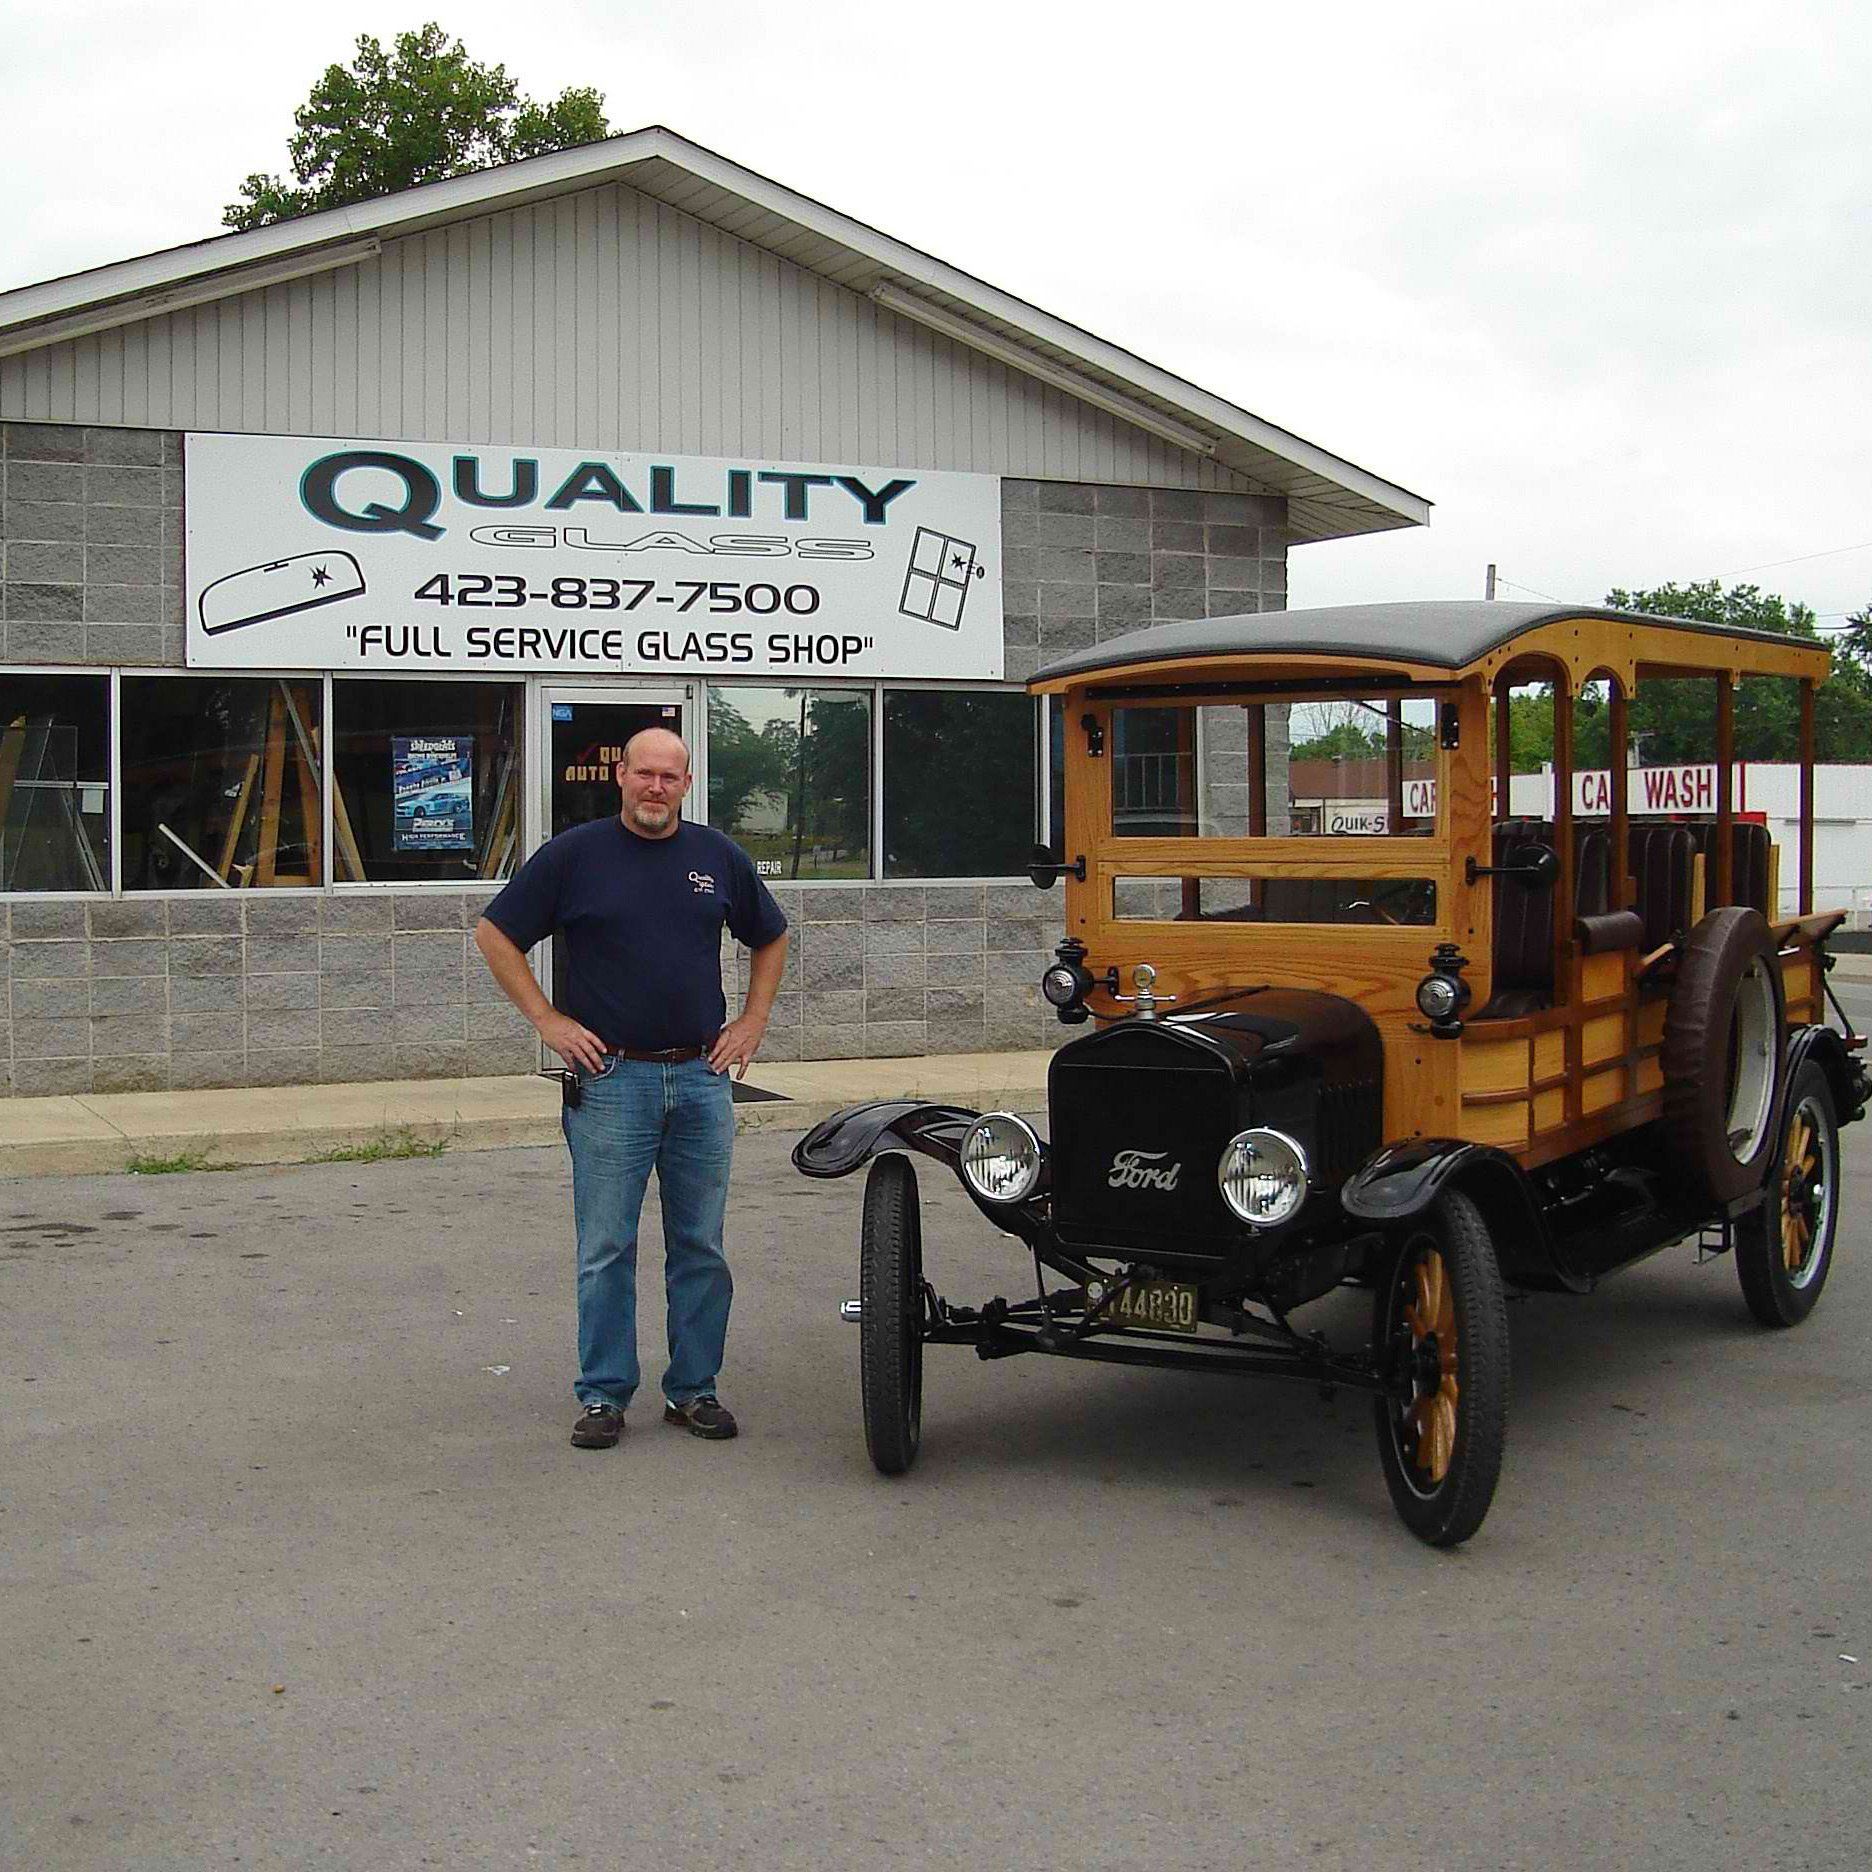 Quality Glass Owner Standing Beside Old Model Car — South Pittsburg, TN — Quality Glass